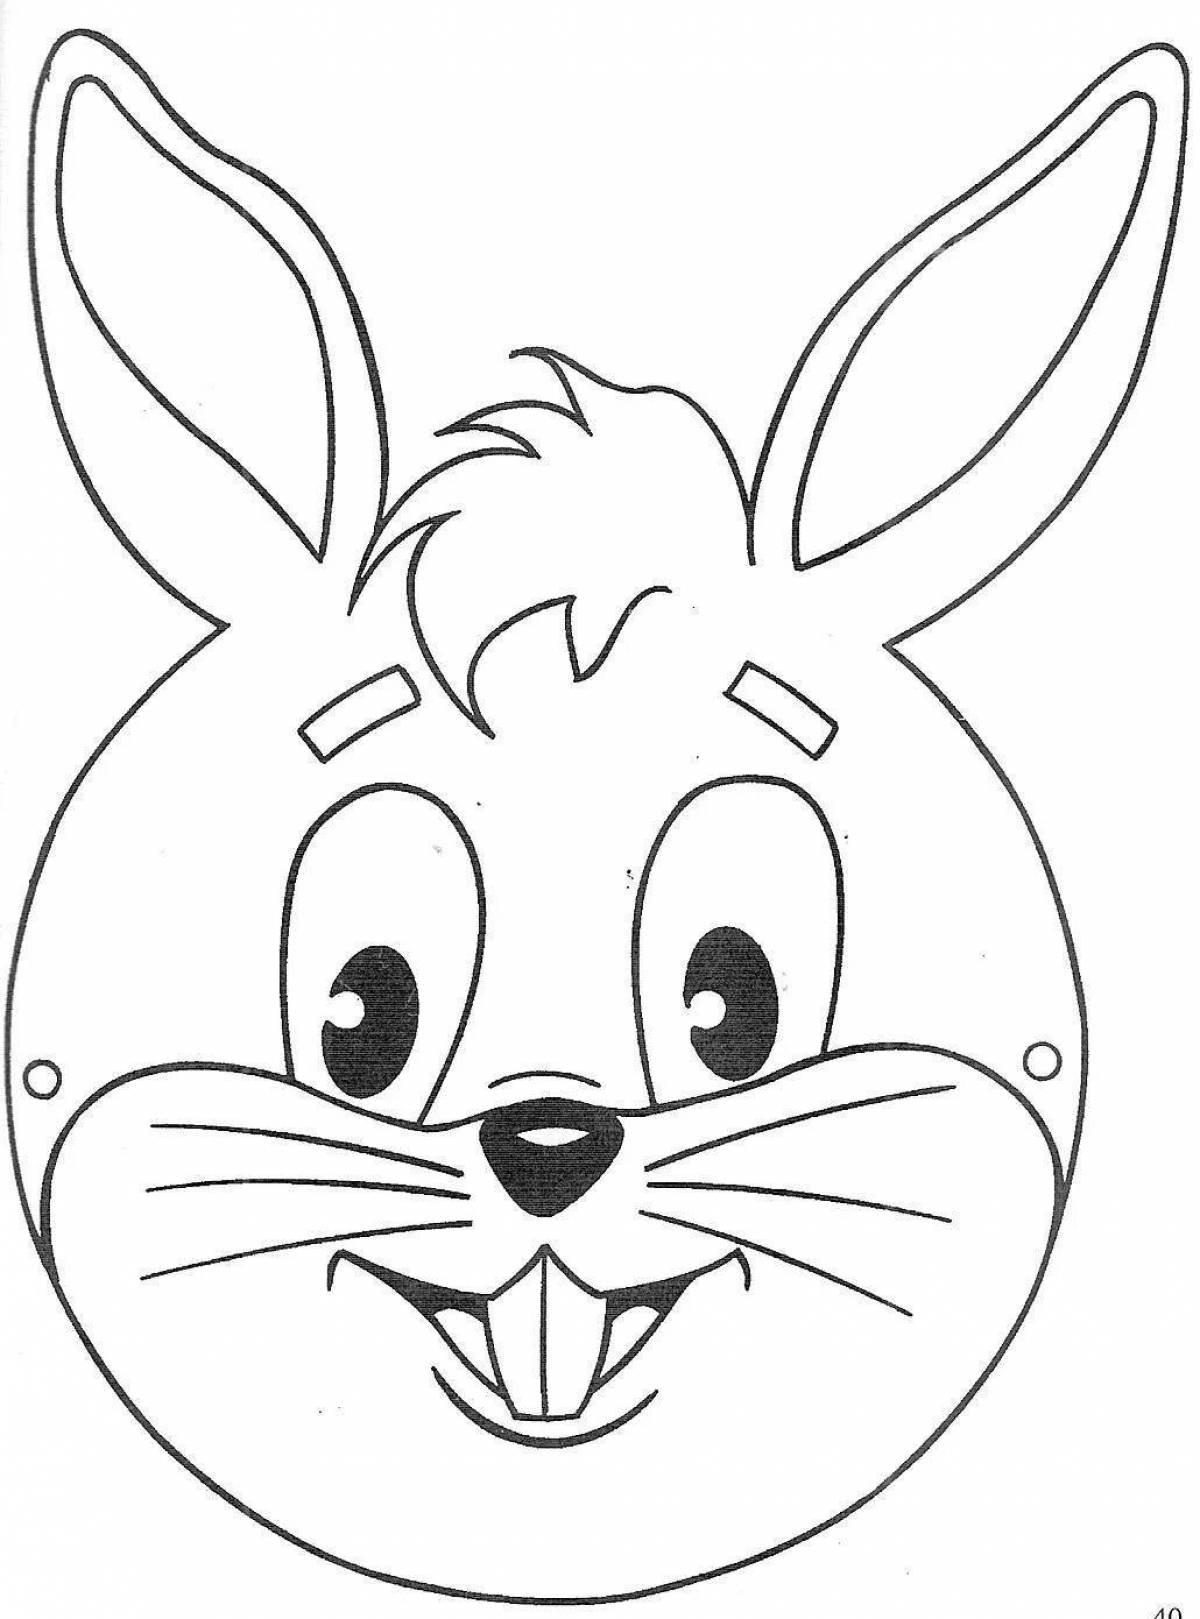 Coloring book gorgeous muzzle of a hare